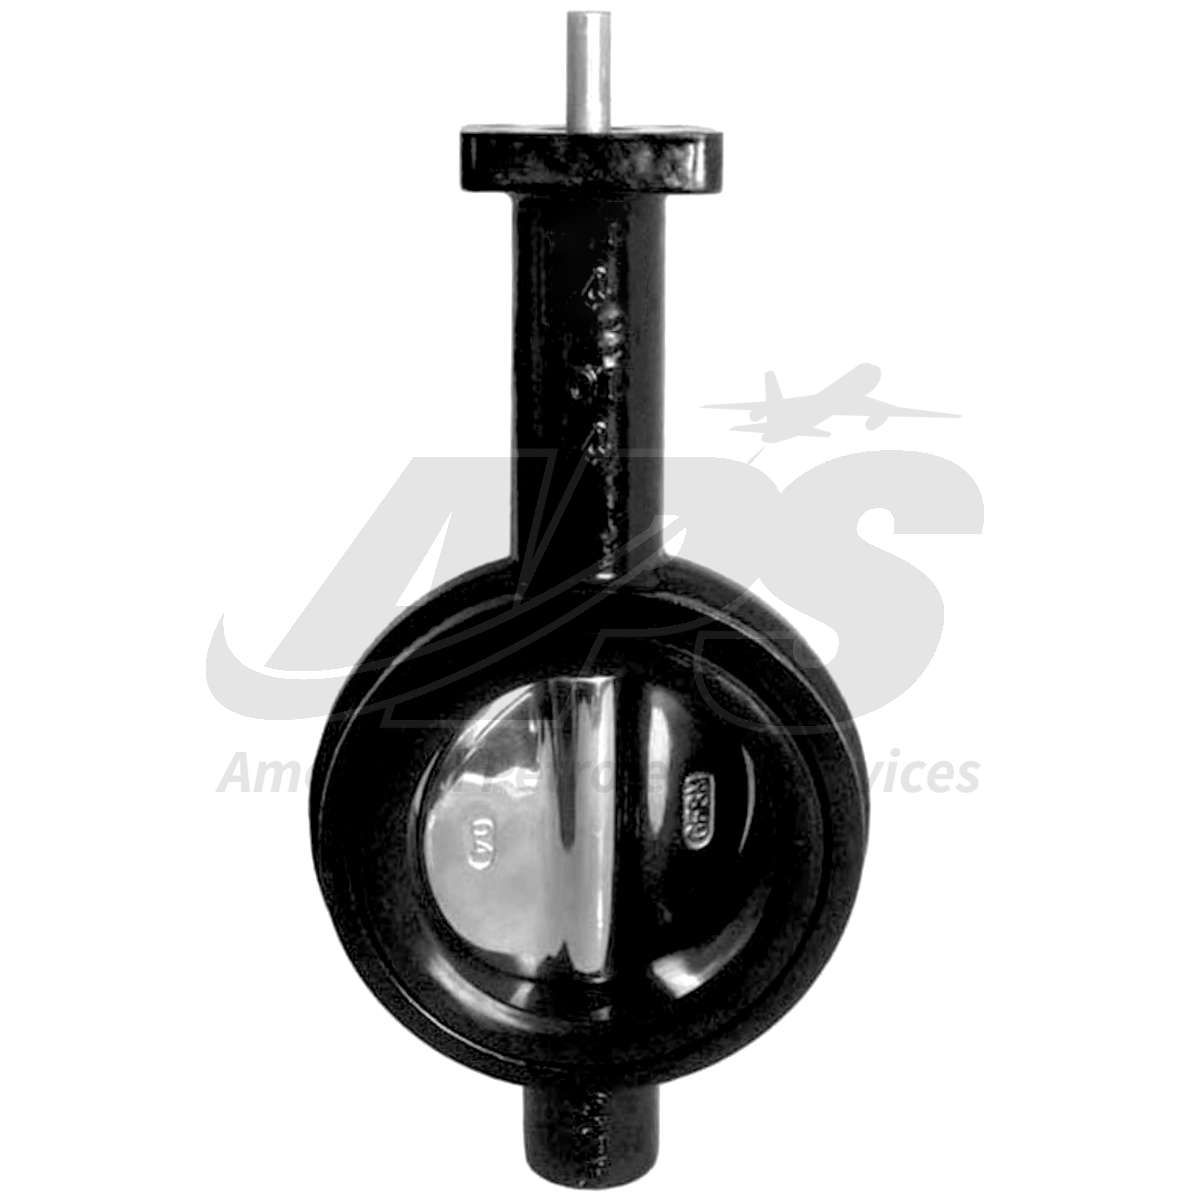 Ductile Iron Disc Buna Seat 200 PSI W/ Handle Details about   6" Wafer Butterfly Valve NEW